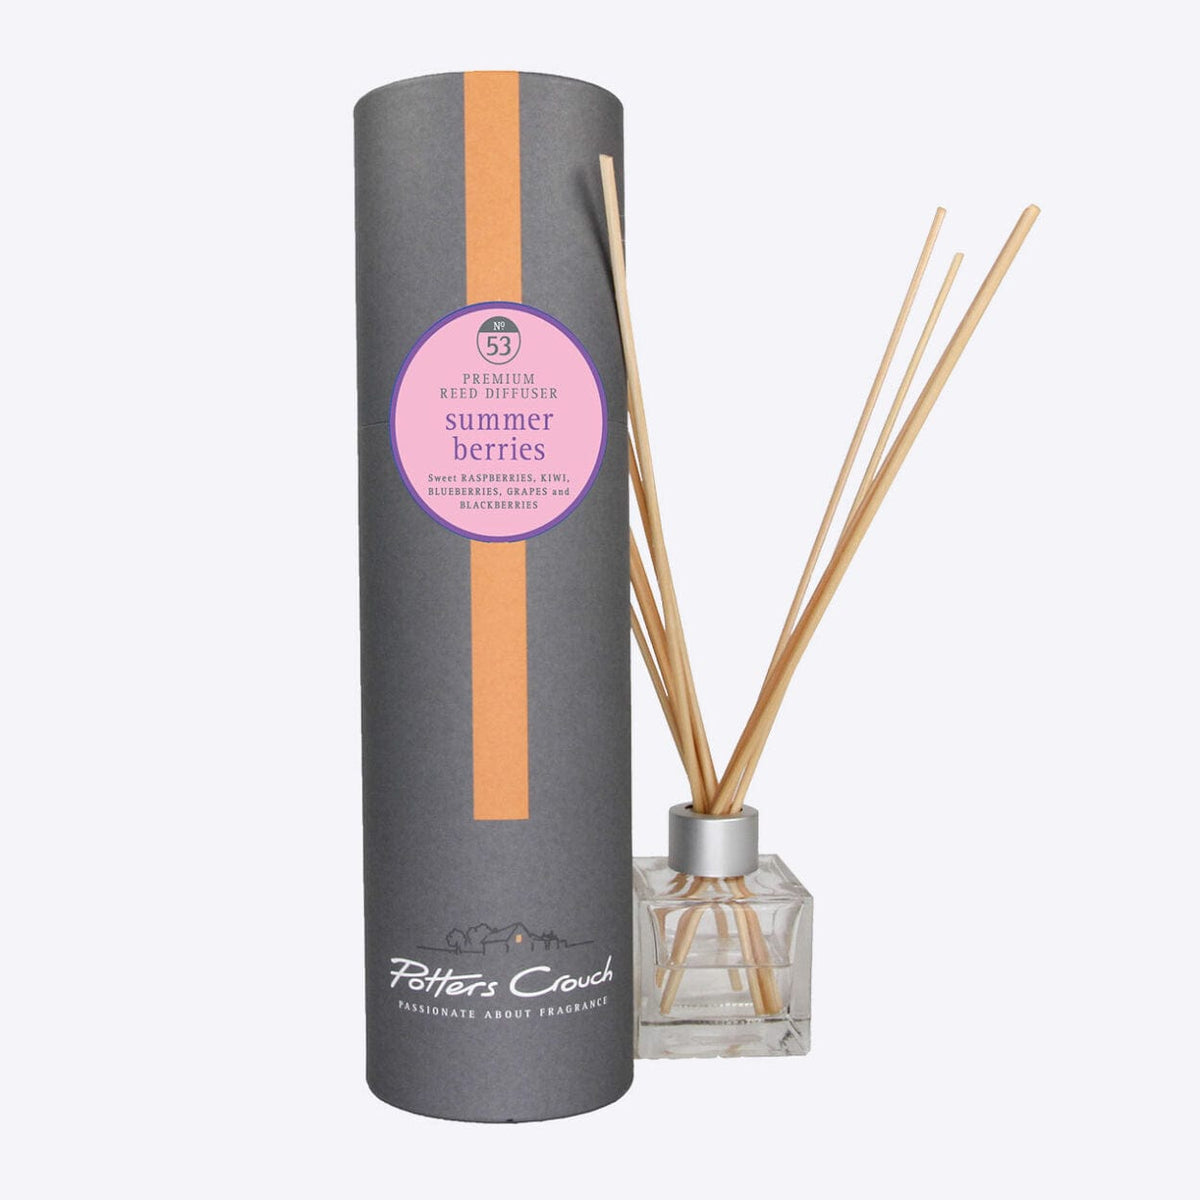 Potters Crouch Summer Berries Scented Reed Diffuser